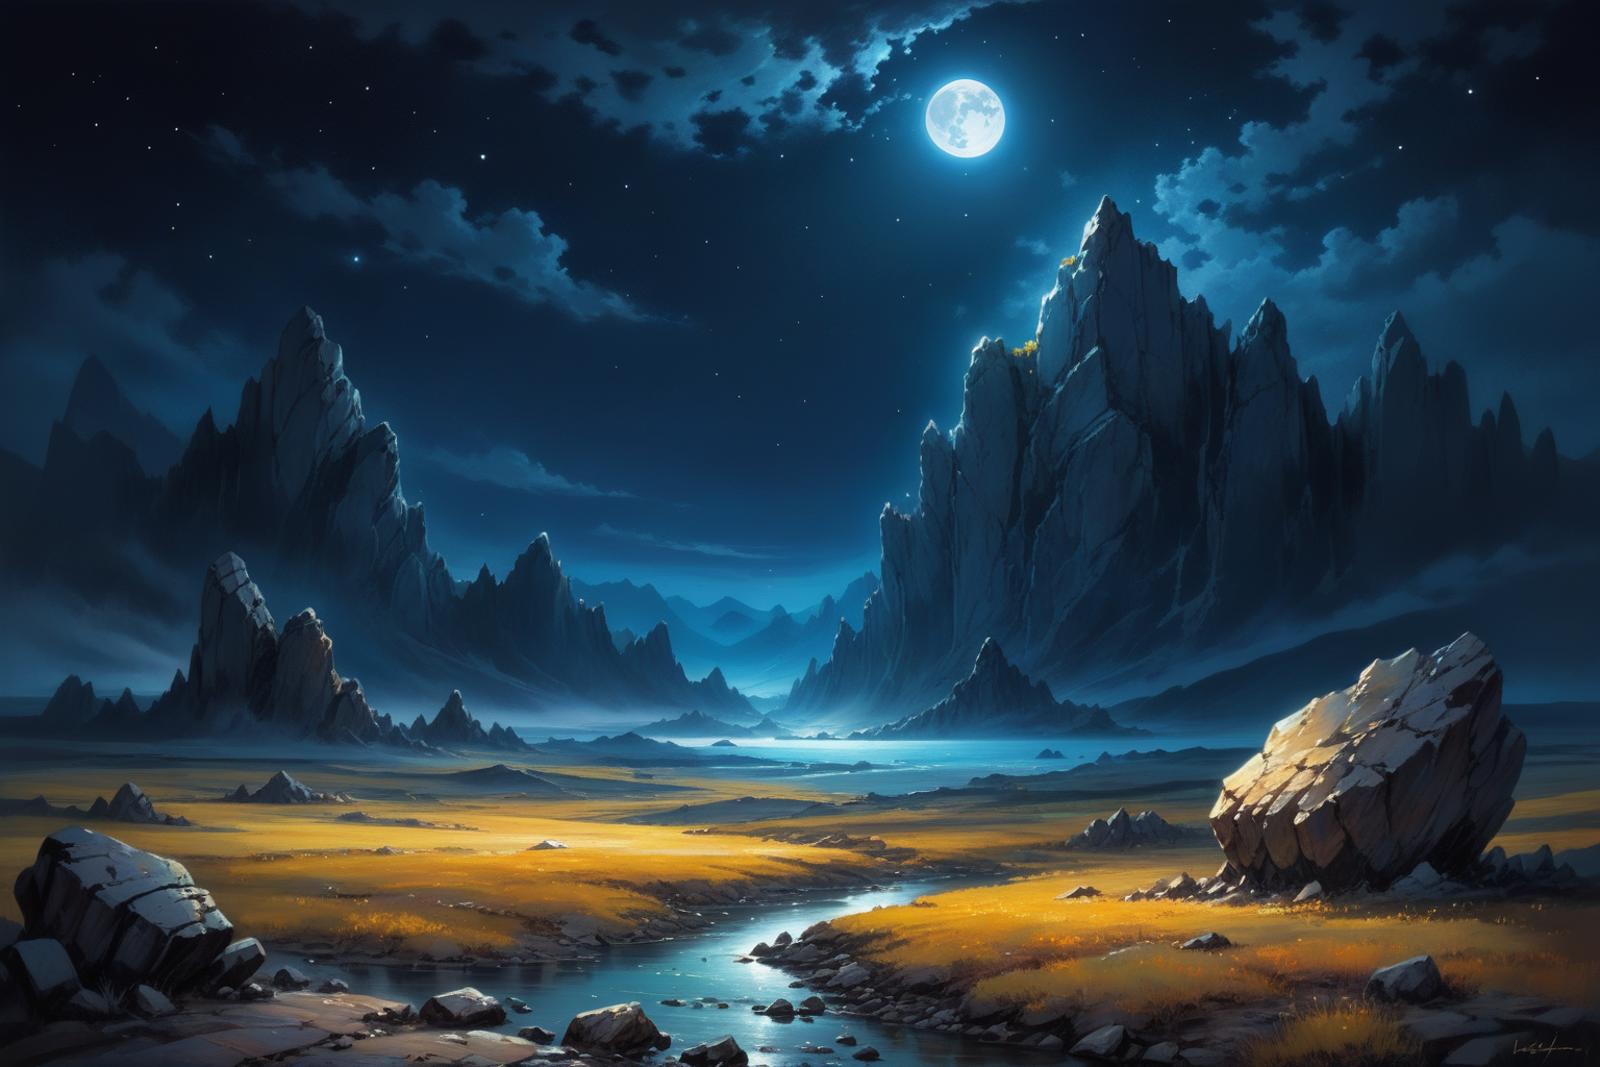 A Beautiful Nighttime Scene of Mountains, a Moon, and a River.